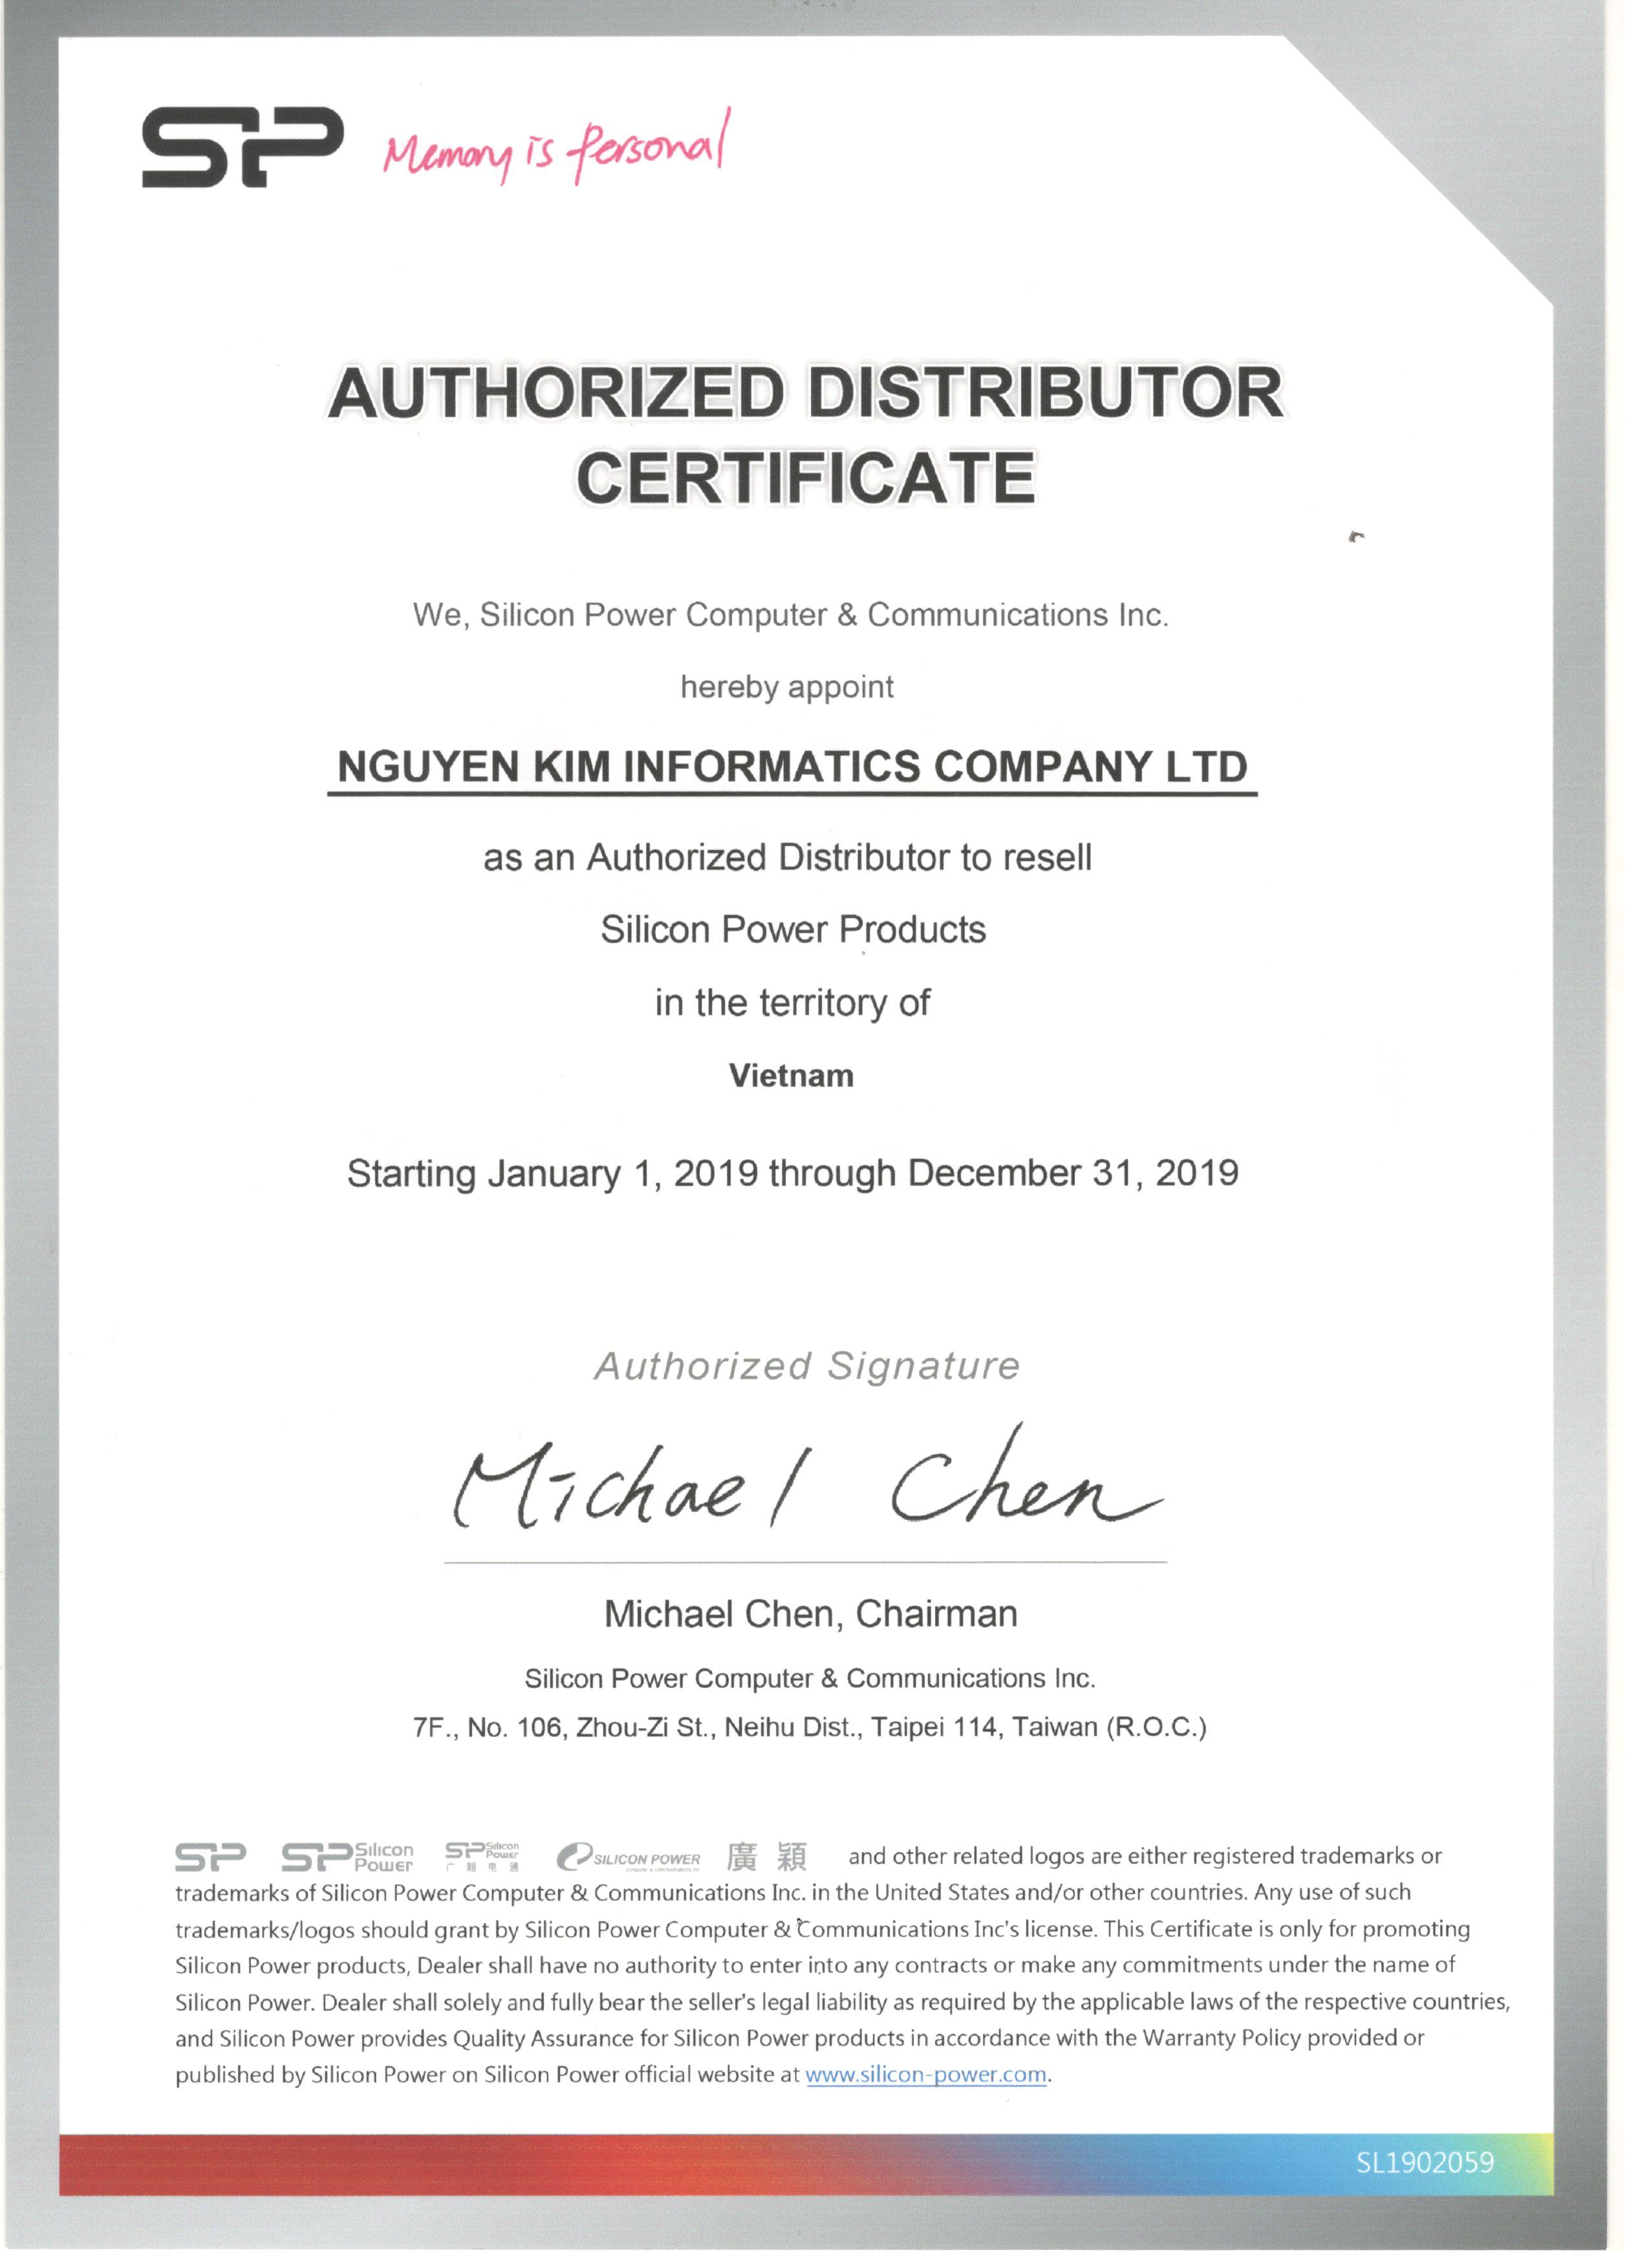 Chứng nhận Authorized Distributor Certificate 2019 - Silicon Power